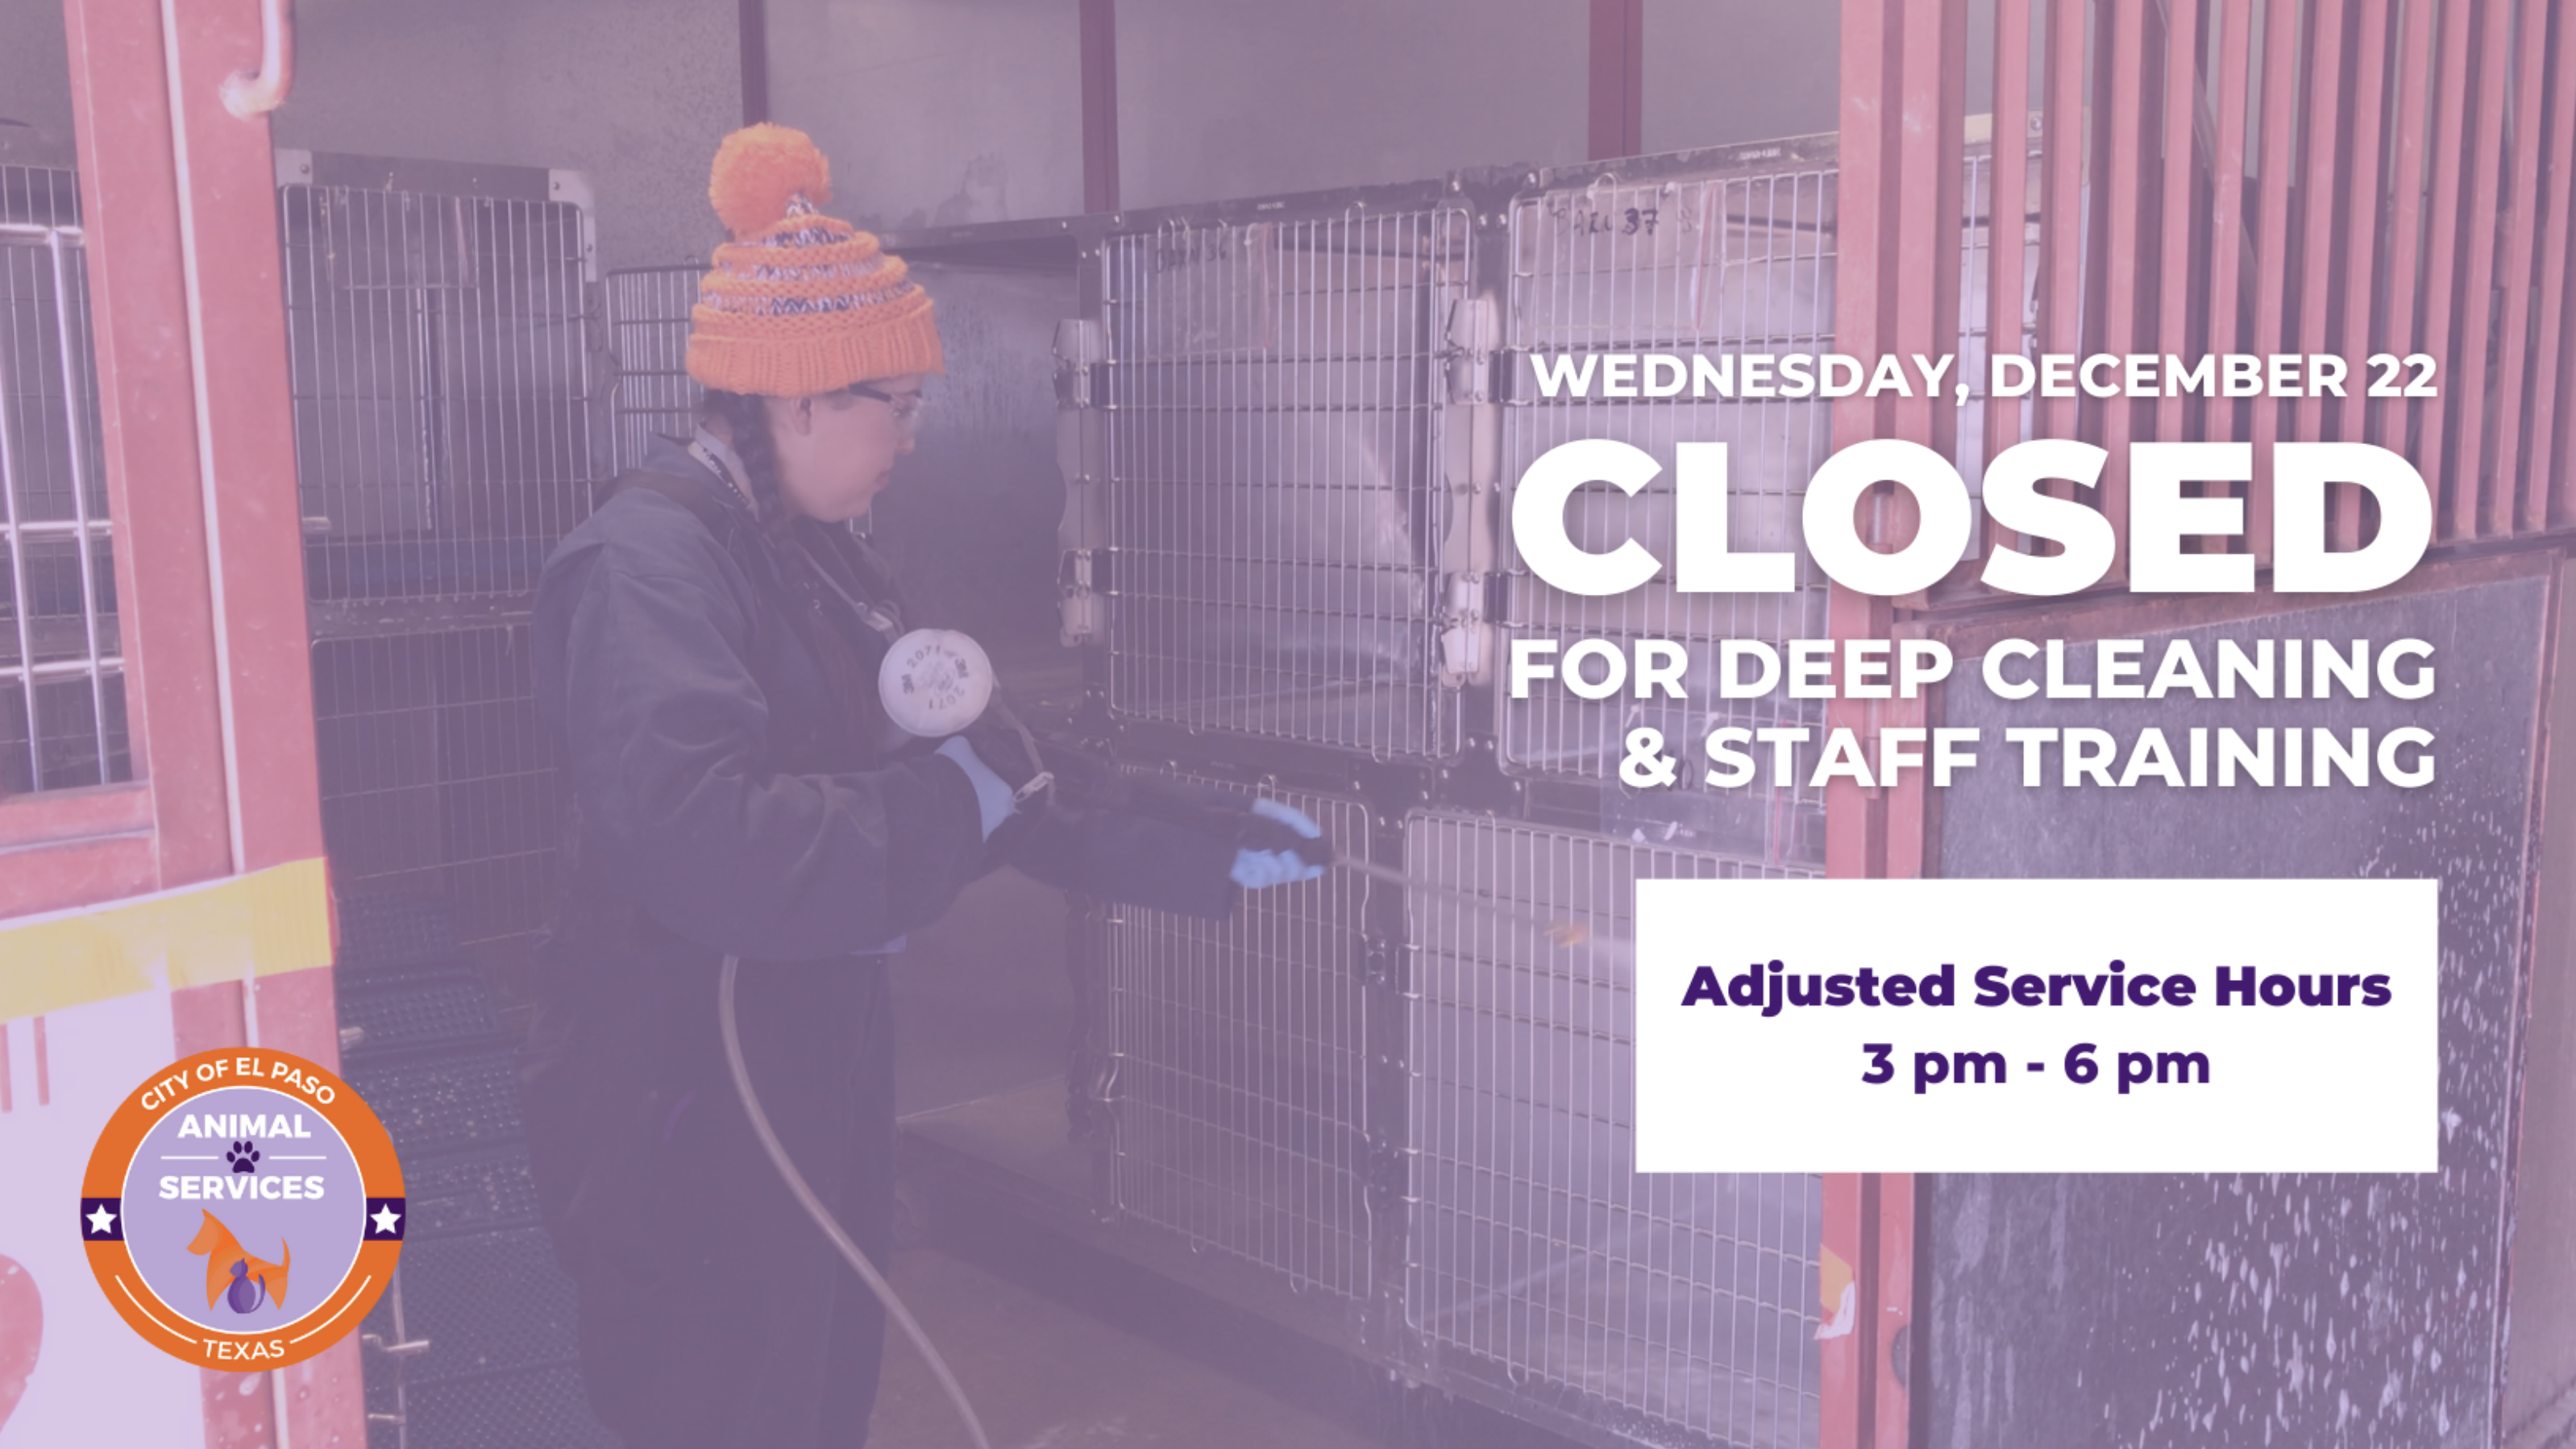 Press Release: Animal Services to Reduce Hours for Deep Cleaning